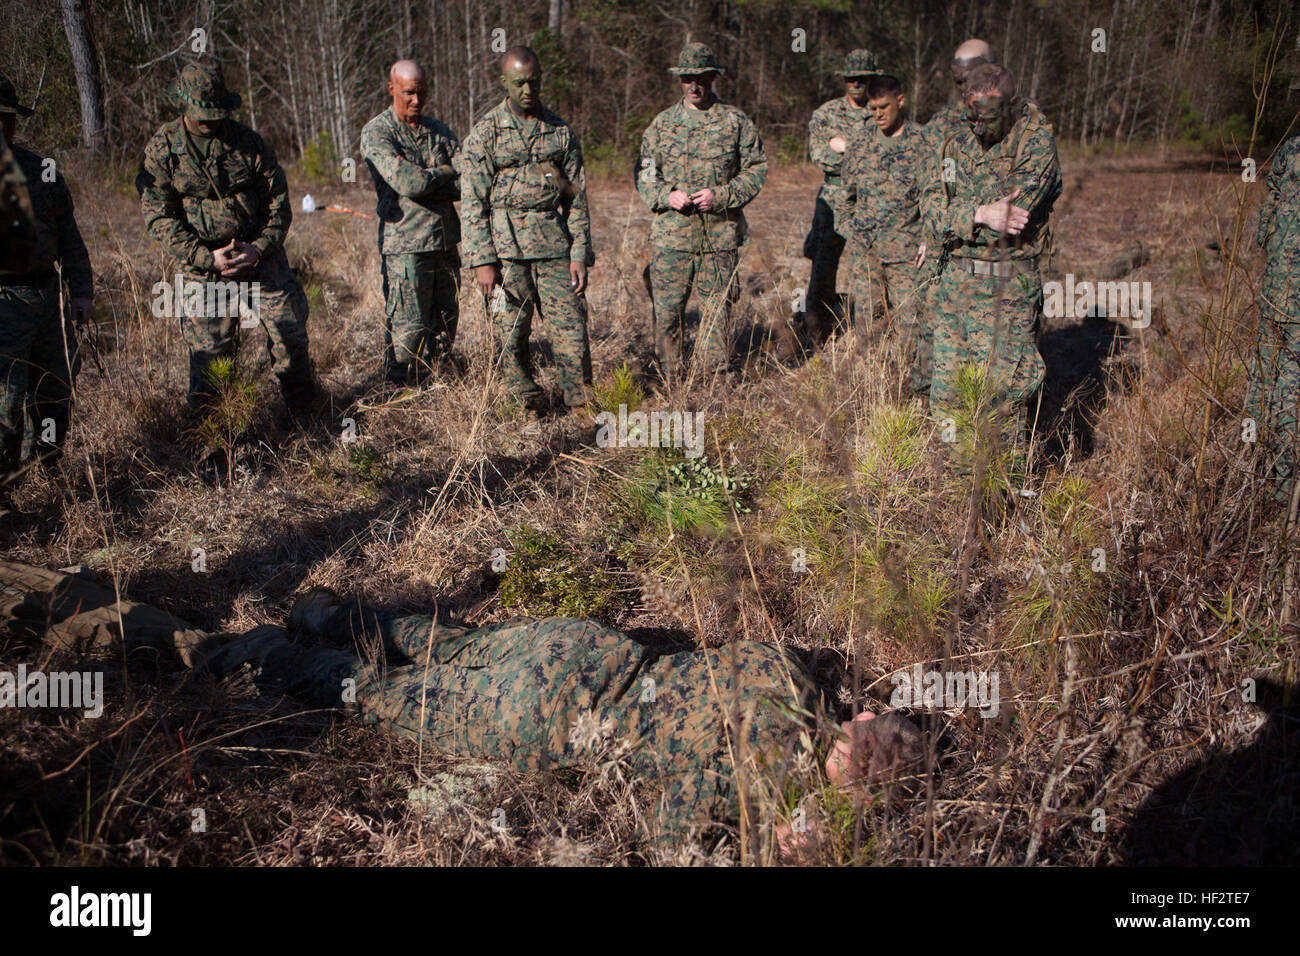 U.S. Marines with the School of Infantry-East receive a class on camouflage before executing an 800m stalk on Camp Lejeune, NC, Jan. 21, 2015. Officers and Staff NCOs underwent training normally taught to snipers that required each Marine to advance 800 meters, set up, and identify a target all while remaining undetected. (U.S. Marine Corps photo by SOI-East Combat Camera, Lance Cpl. Andrew Kuppers/ Released) School of Infantry Officers and Staff NCOs undergo Scout Sniper Training 150121-M-NT768-016 Stock Photo